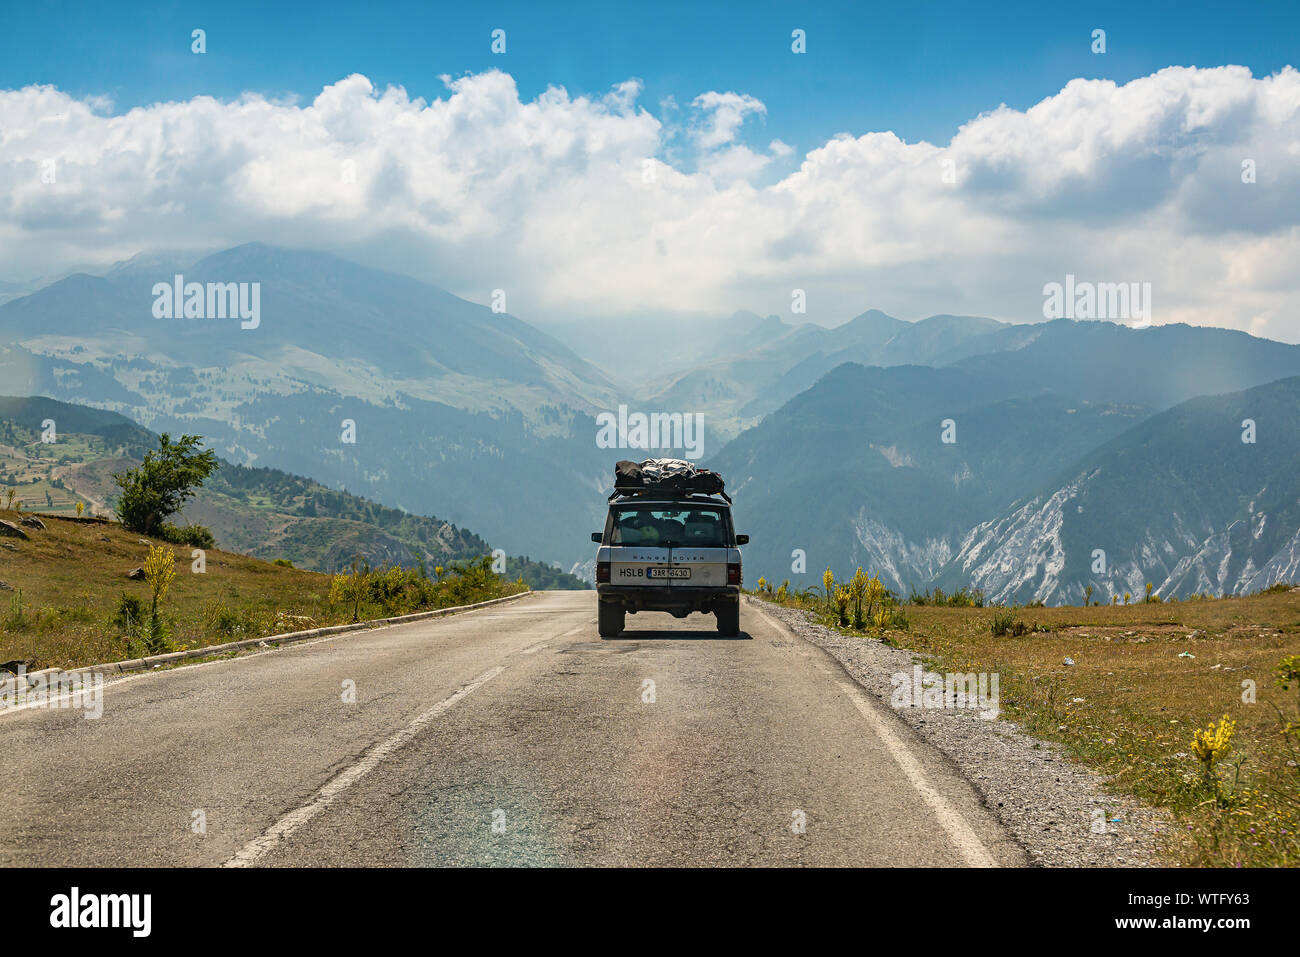 Kolesjan, Albania - July 25, 2019. Vintage off road car heading to the mountain in National Park LureKolesjan, Albania - July 25, 2019. Vintage off ro Stock Photo